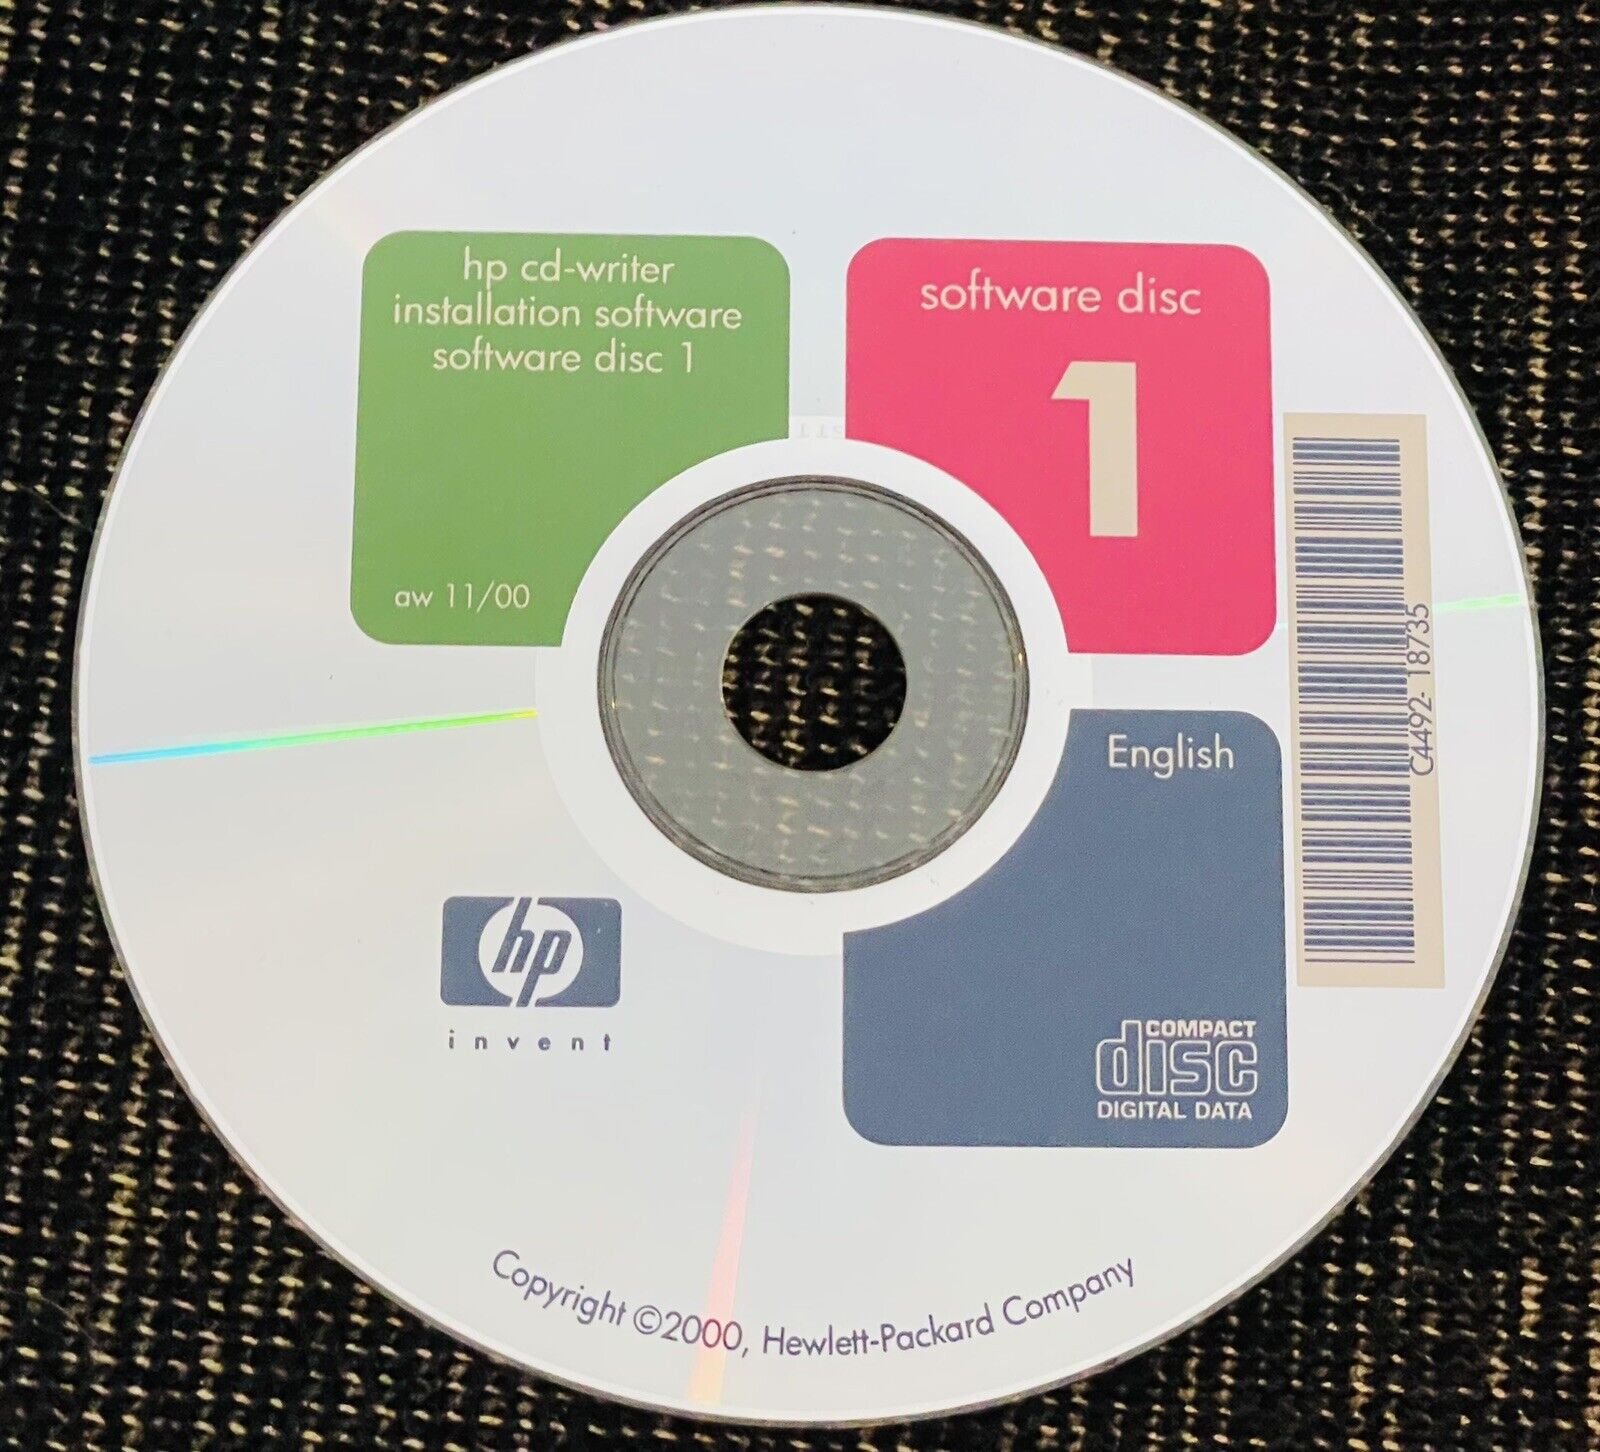 HP Invent Cd-Writer Installation Software Disc 1 aw 12/00 